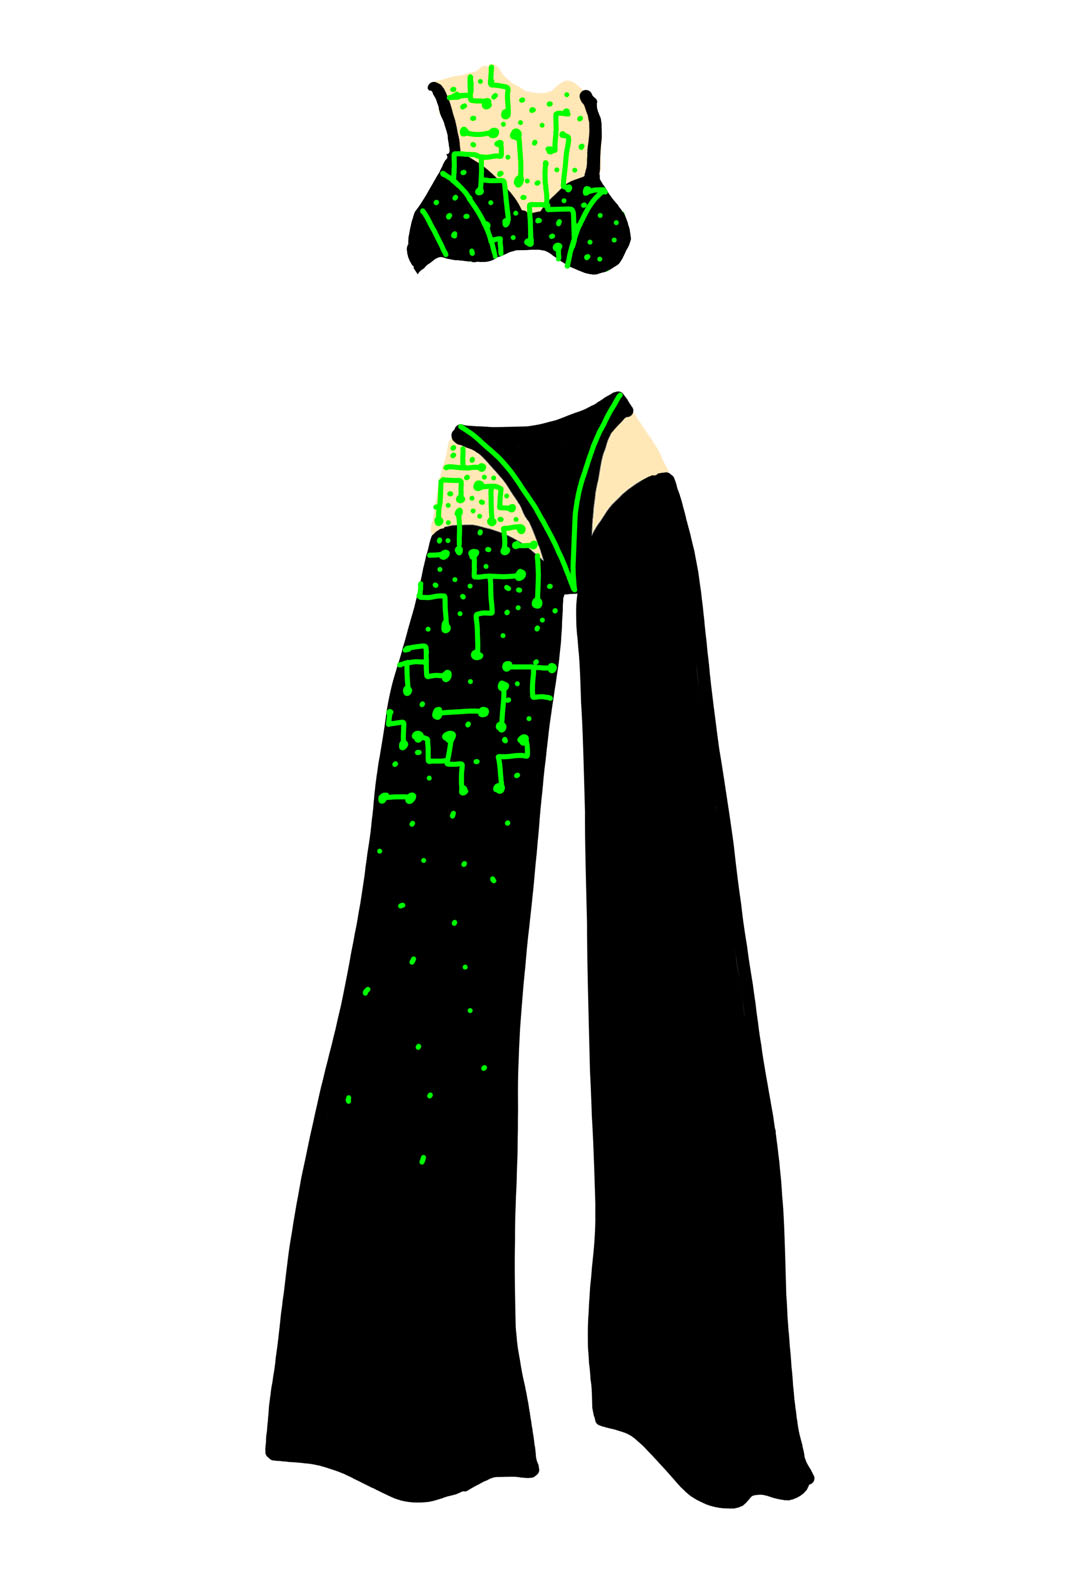 A photoshop sketch of a two-piece black-and-green outfit. The top is a black bralette with nude mesh and green embroidery made to look like circuitry on it. The pant is also a black-and-nude mesh combo with green circuitry-inspired embroidery on it.